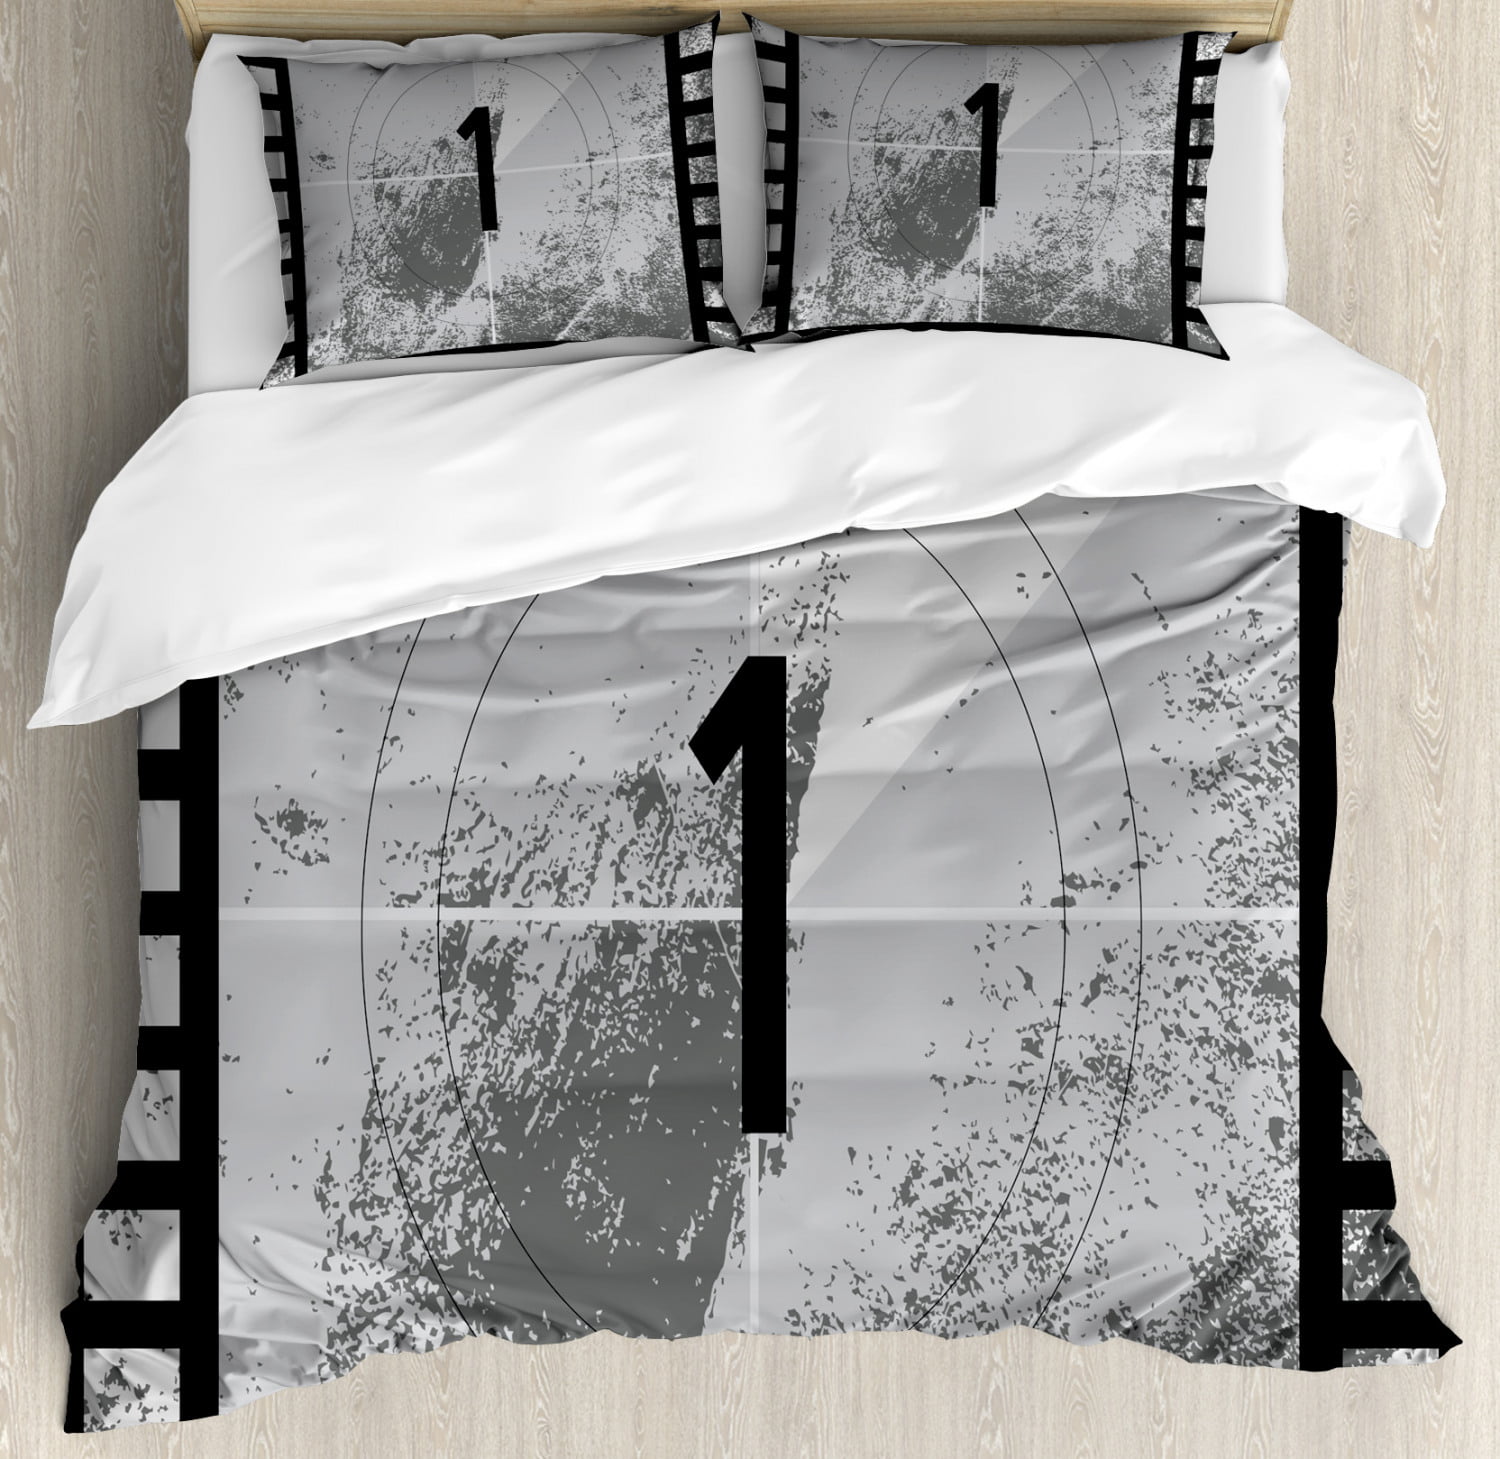 Old Hollywood King Size Duvet Cover Set Film Countdown Number One